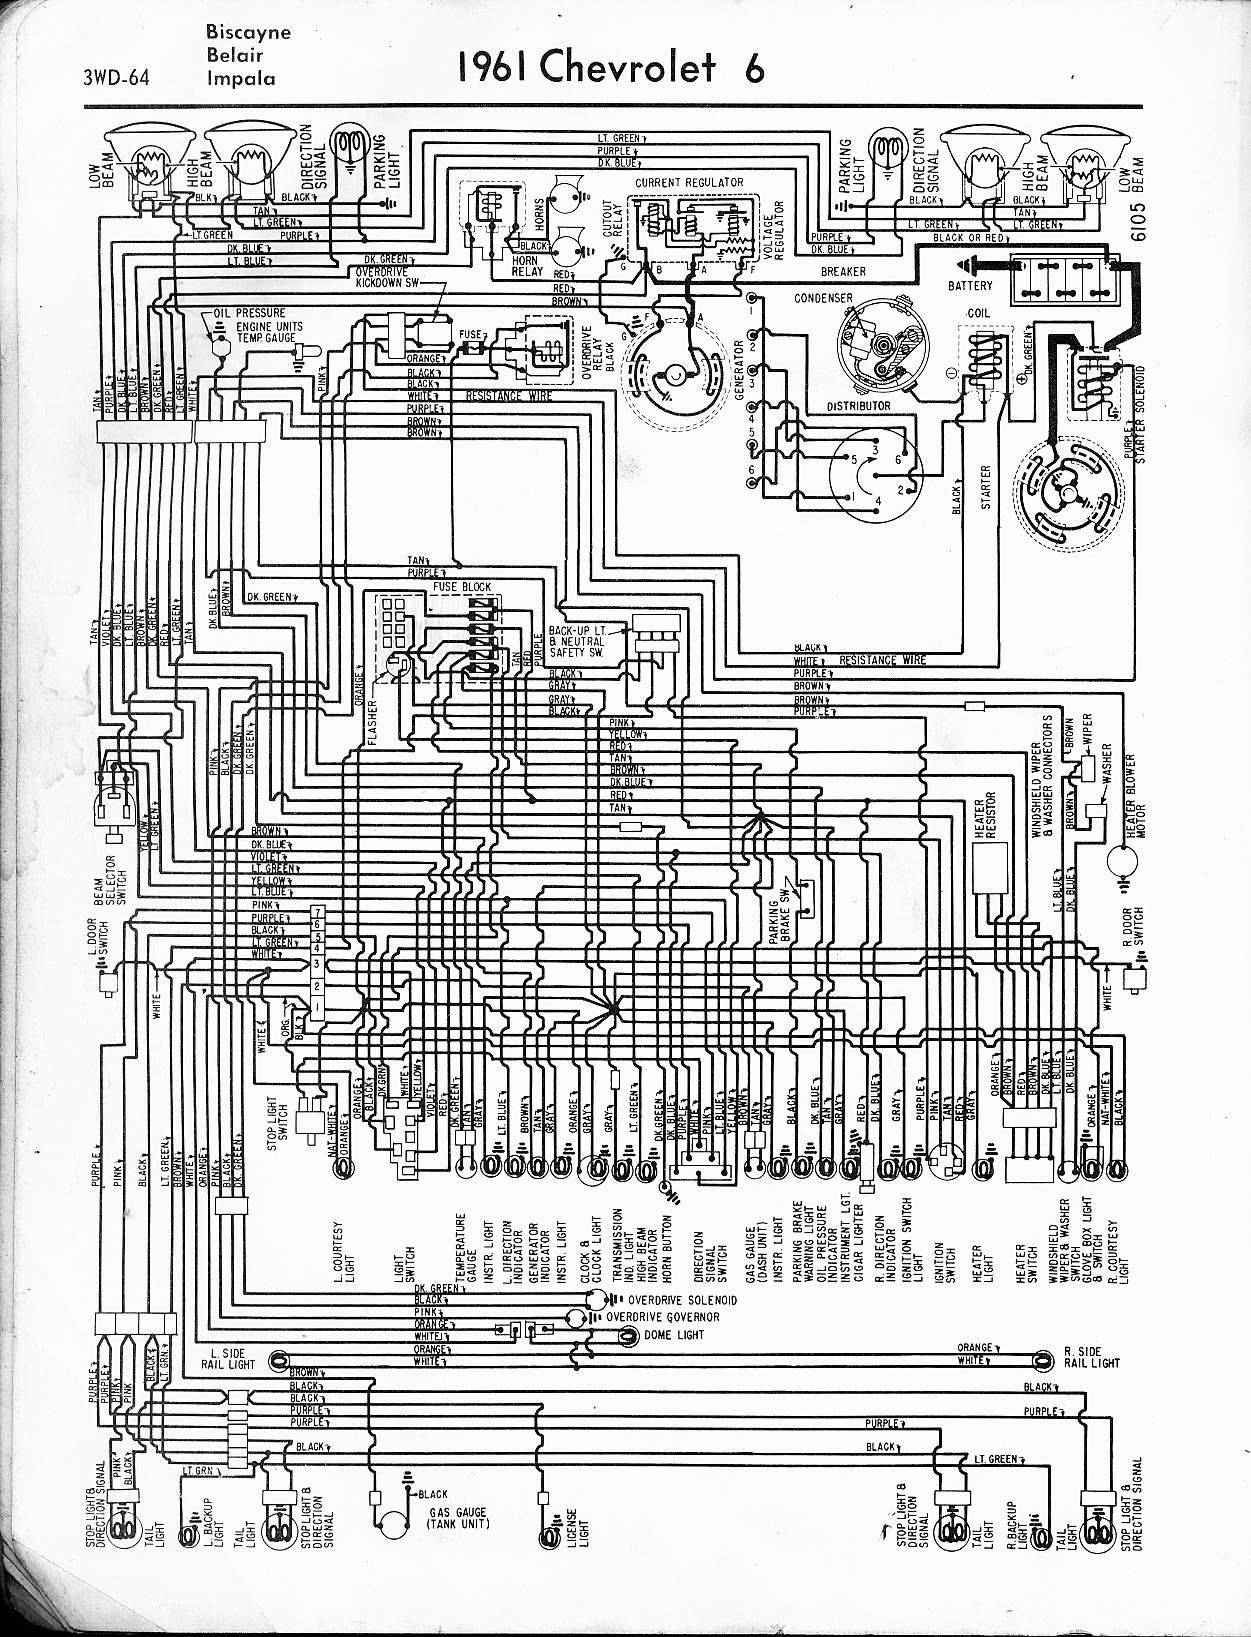 57 Chevy Ignition Switch Wiring Diagram - Wiring Diagram